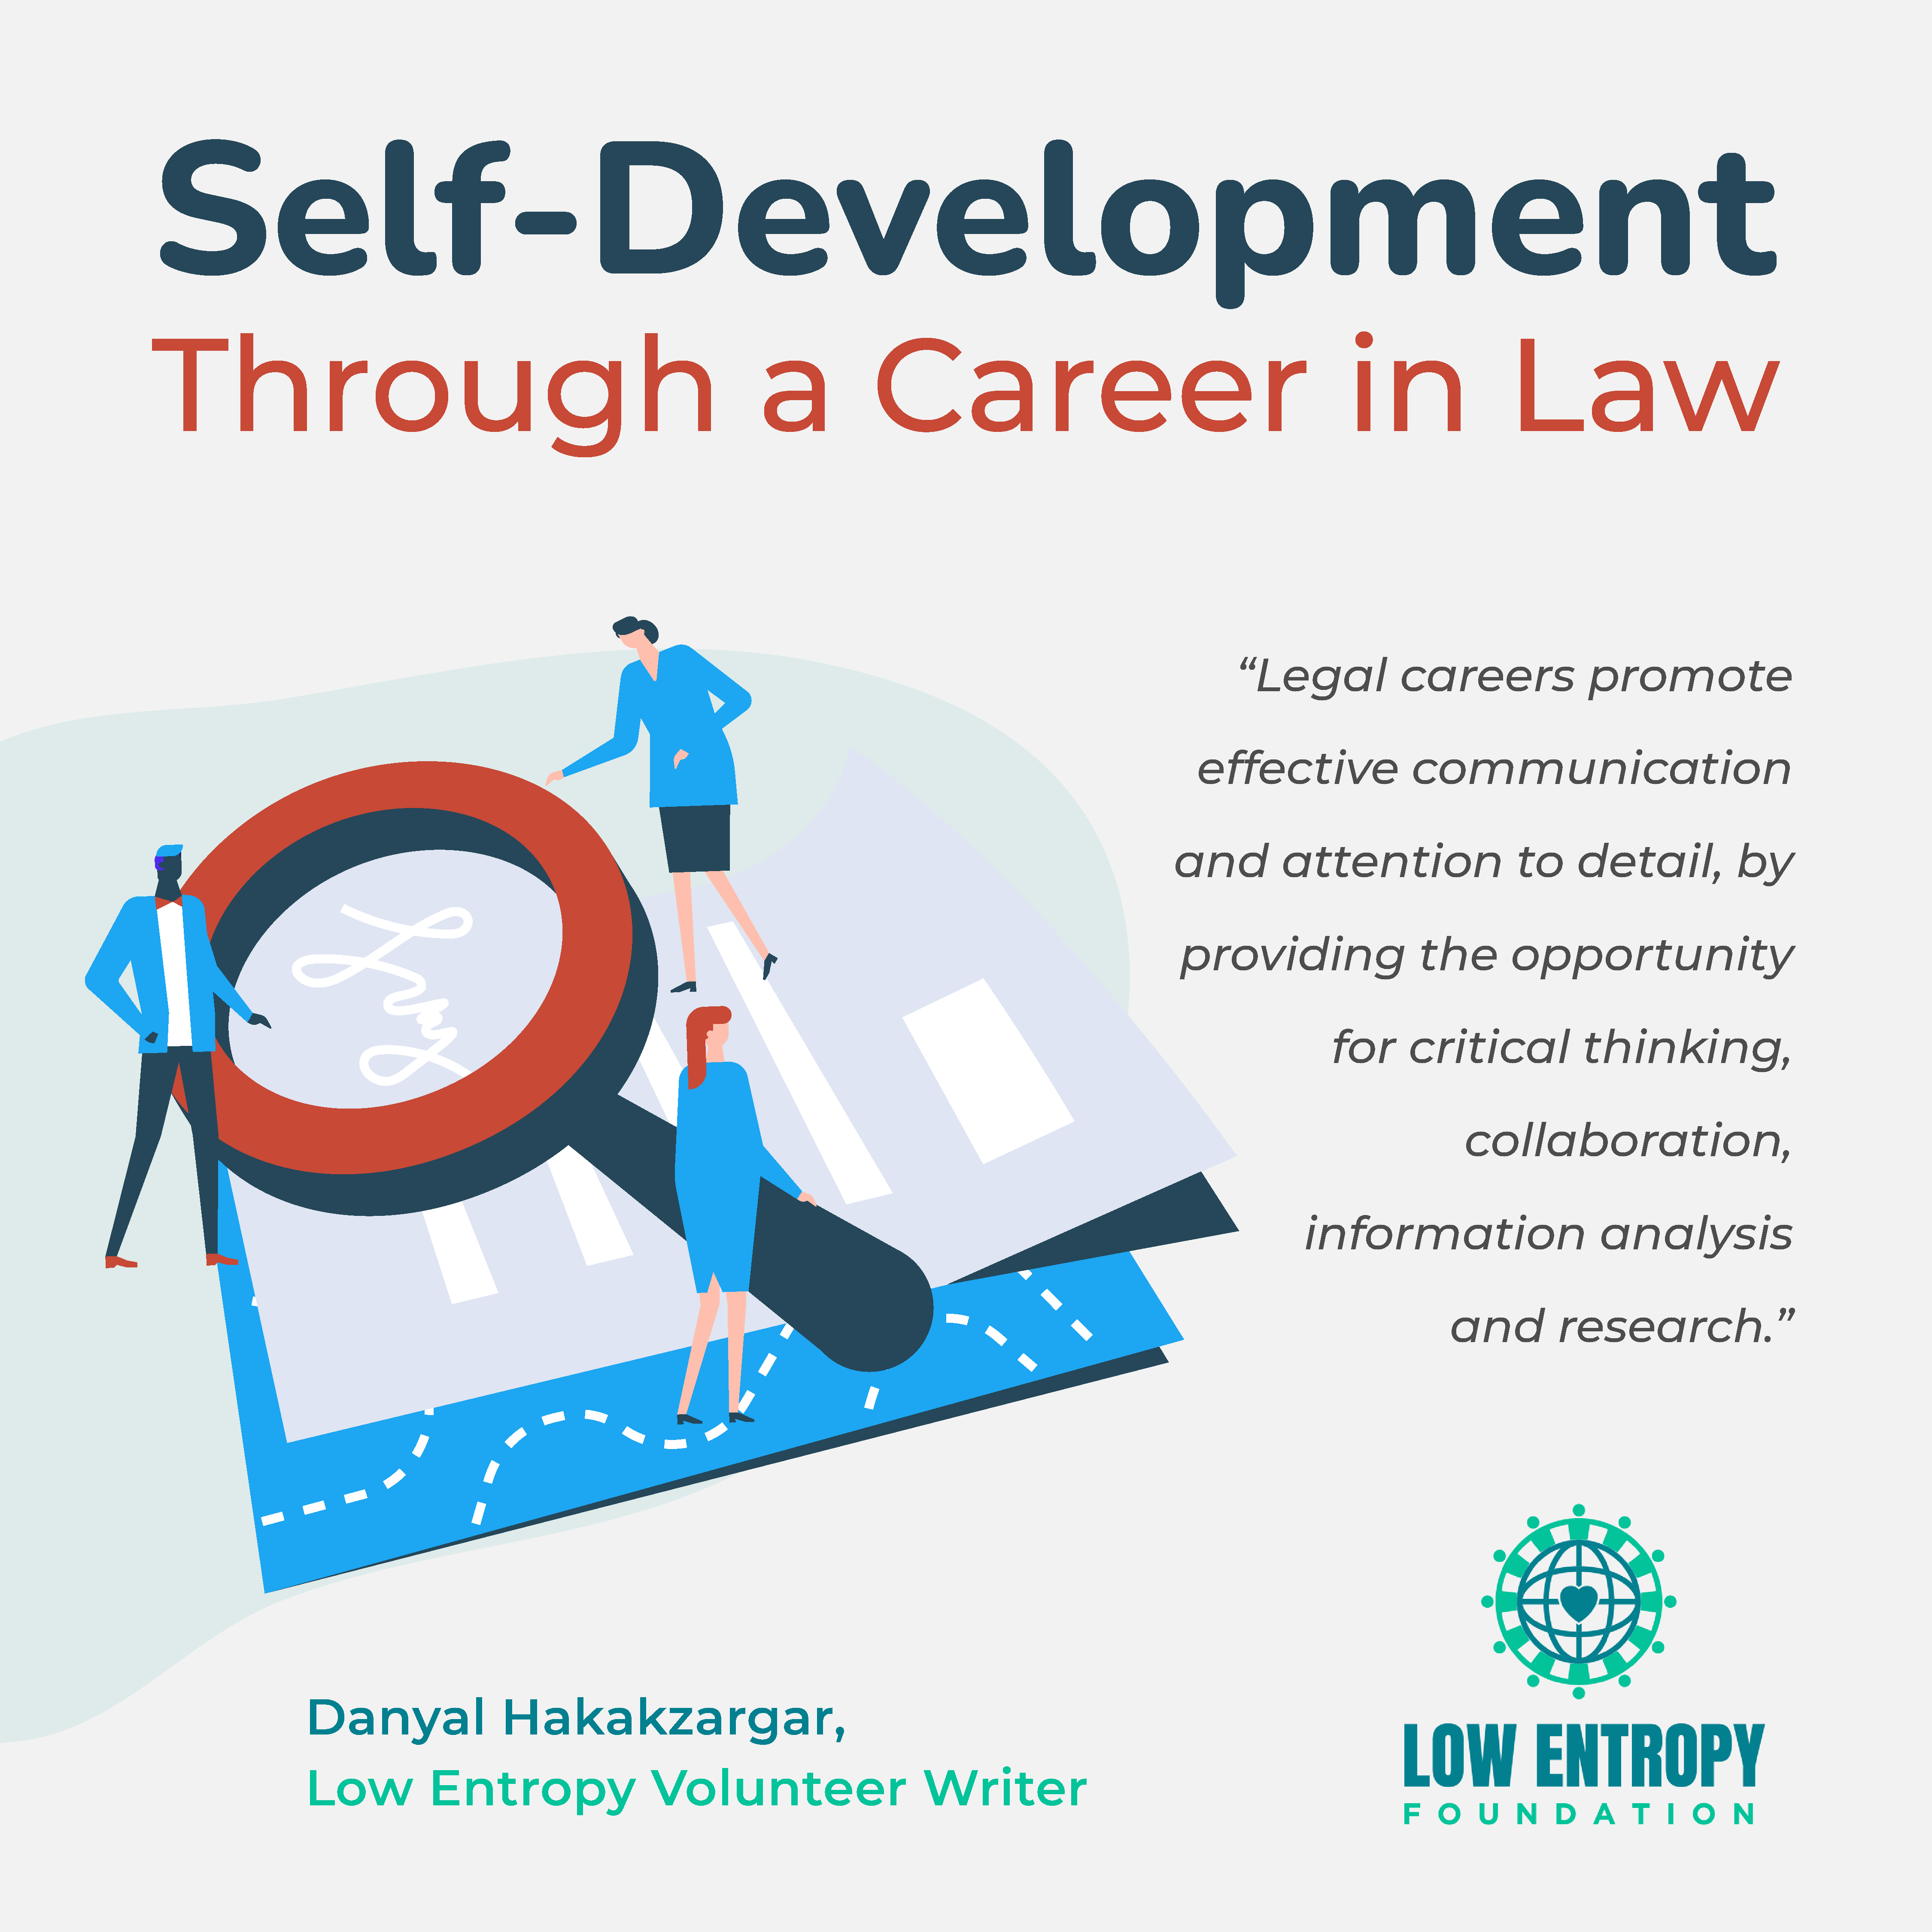 Self-Development Through a Career in Law